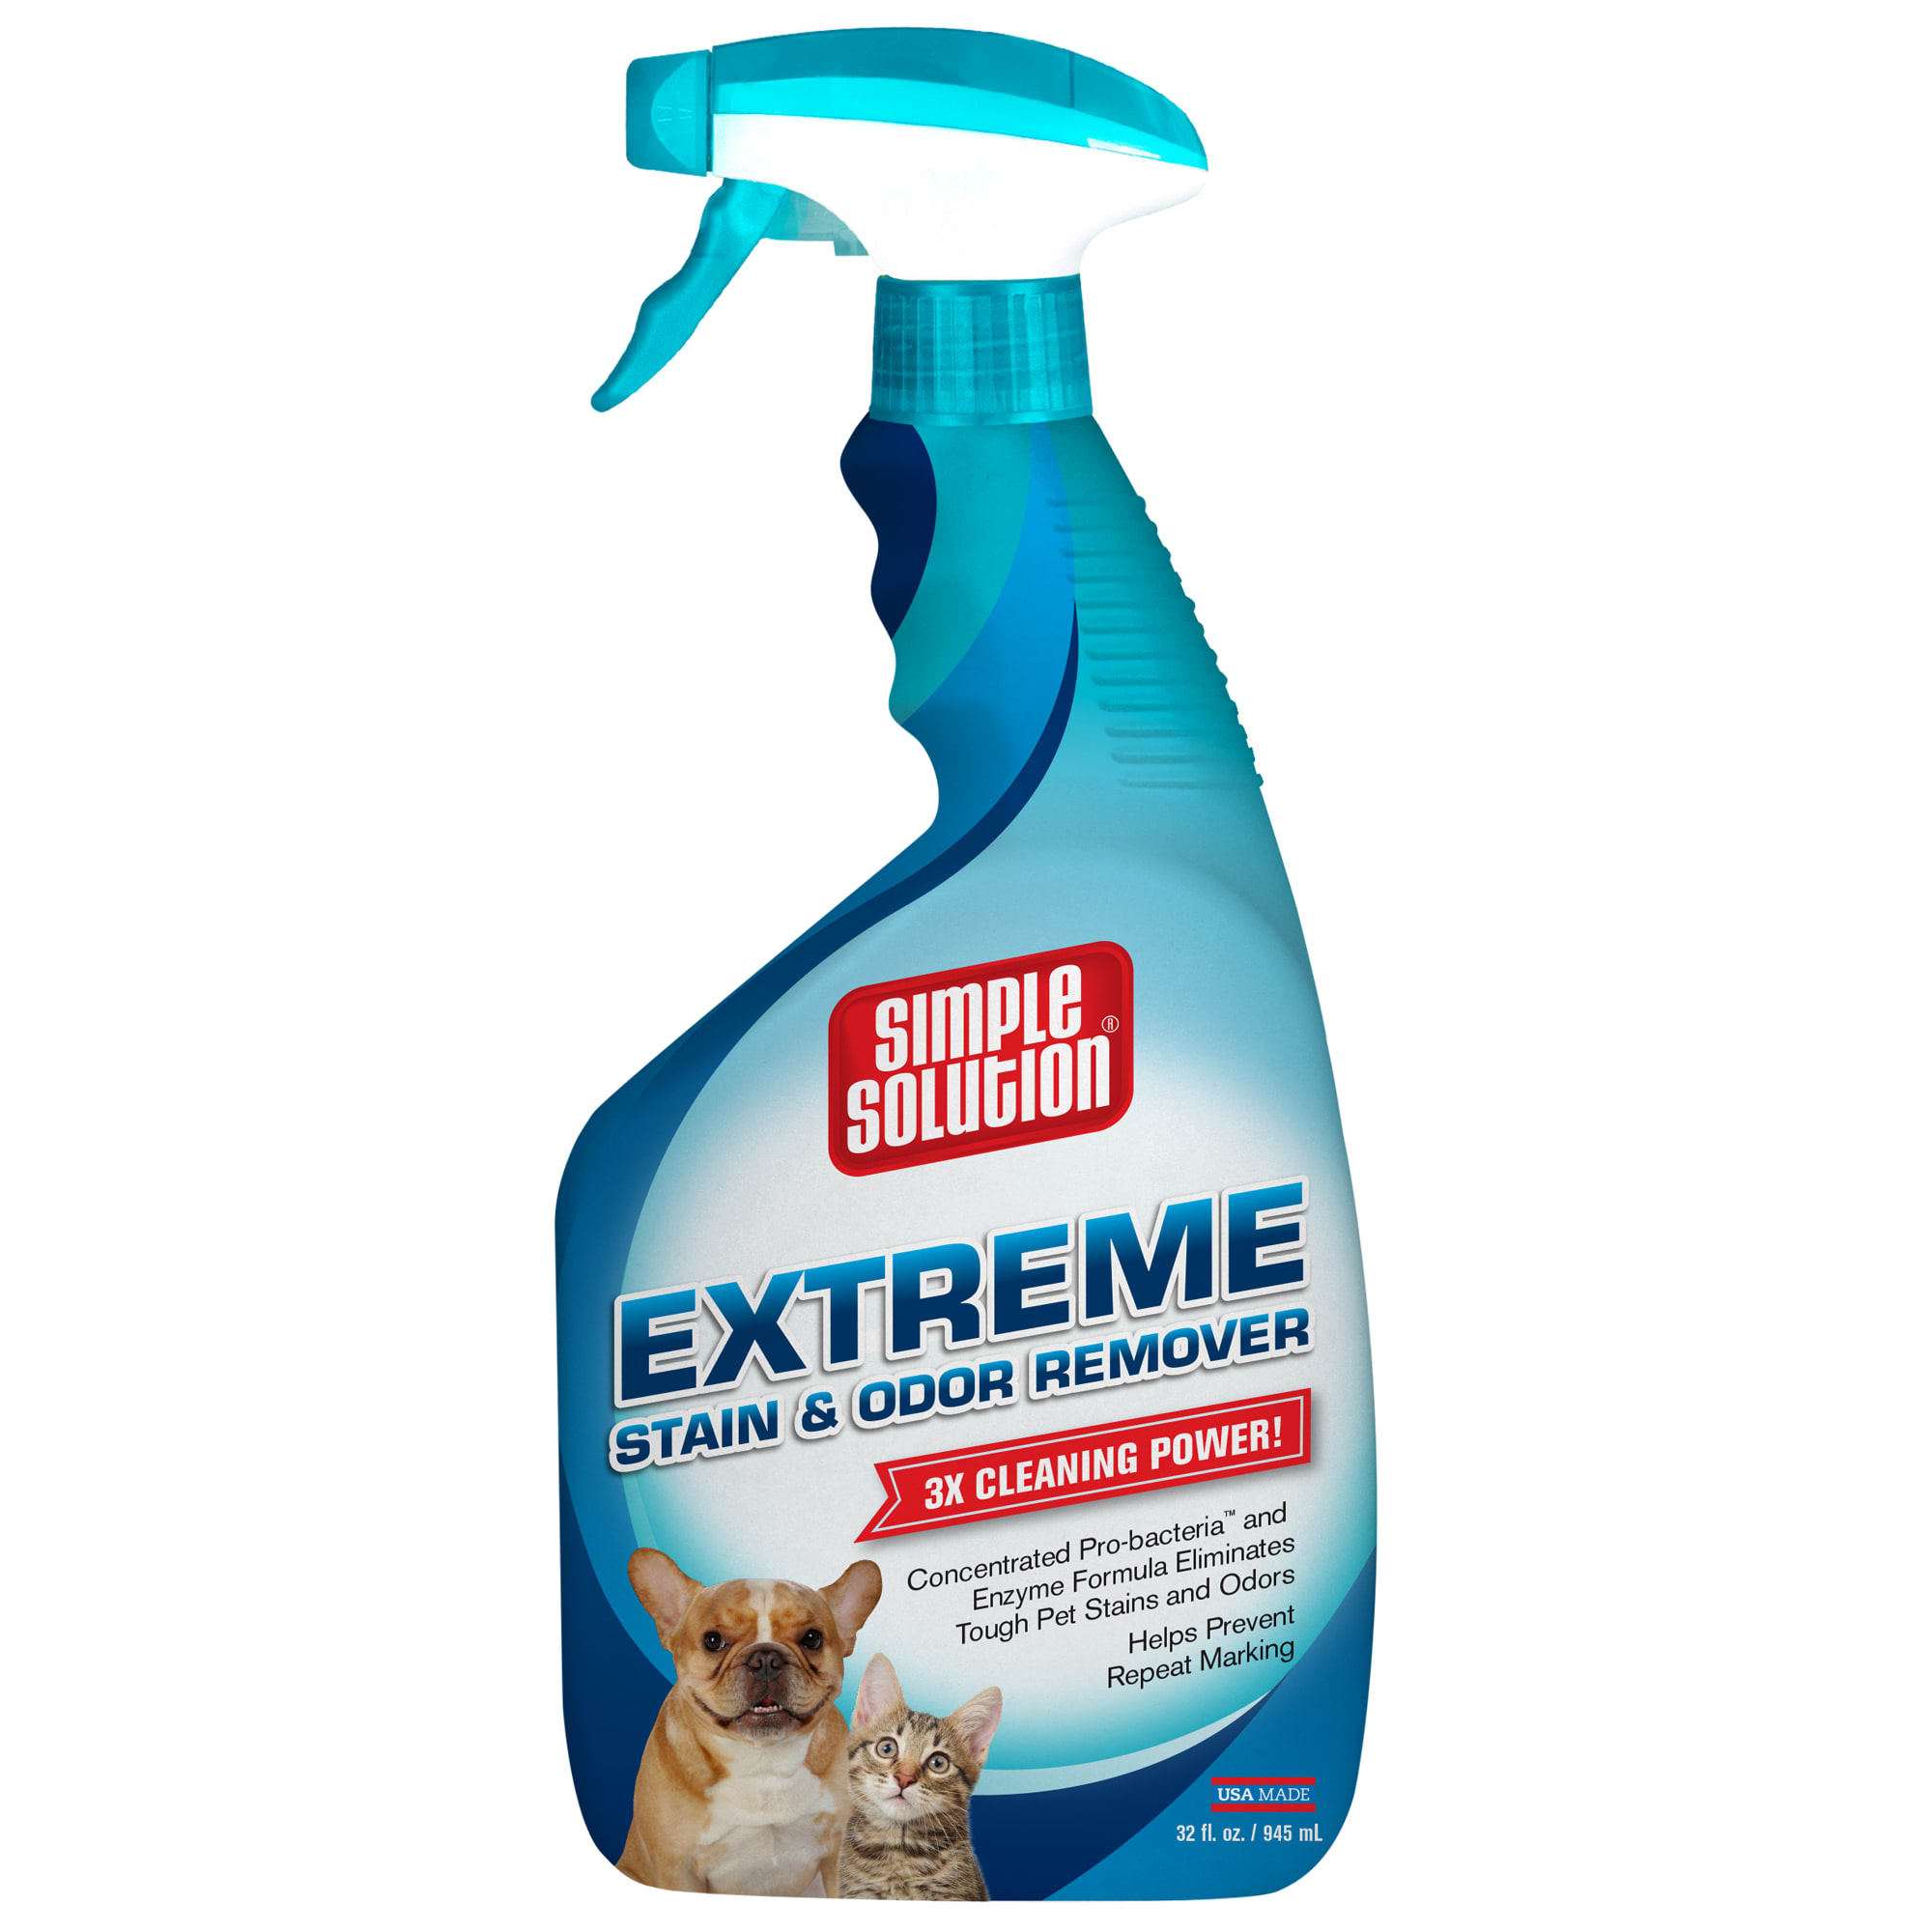 Extreme Stain Odor Remover